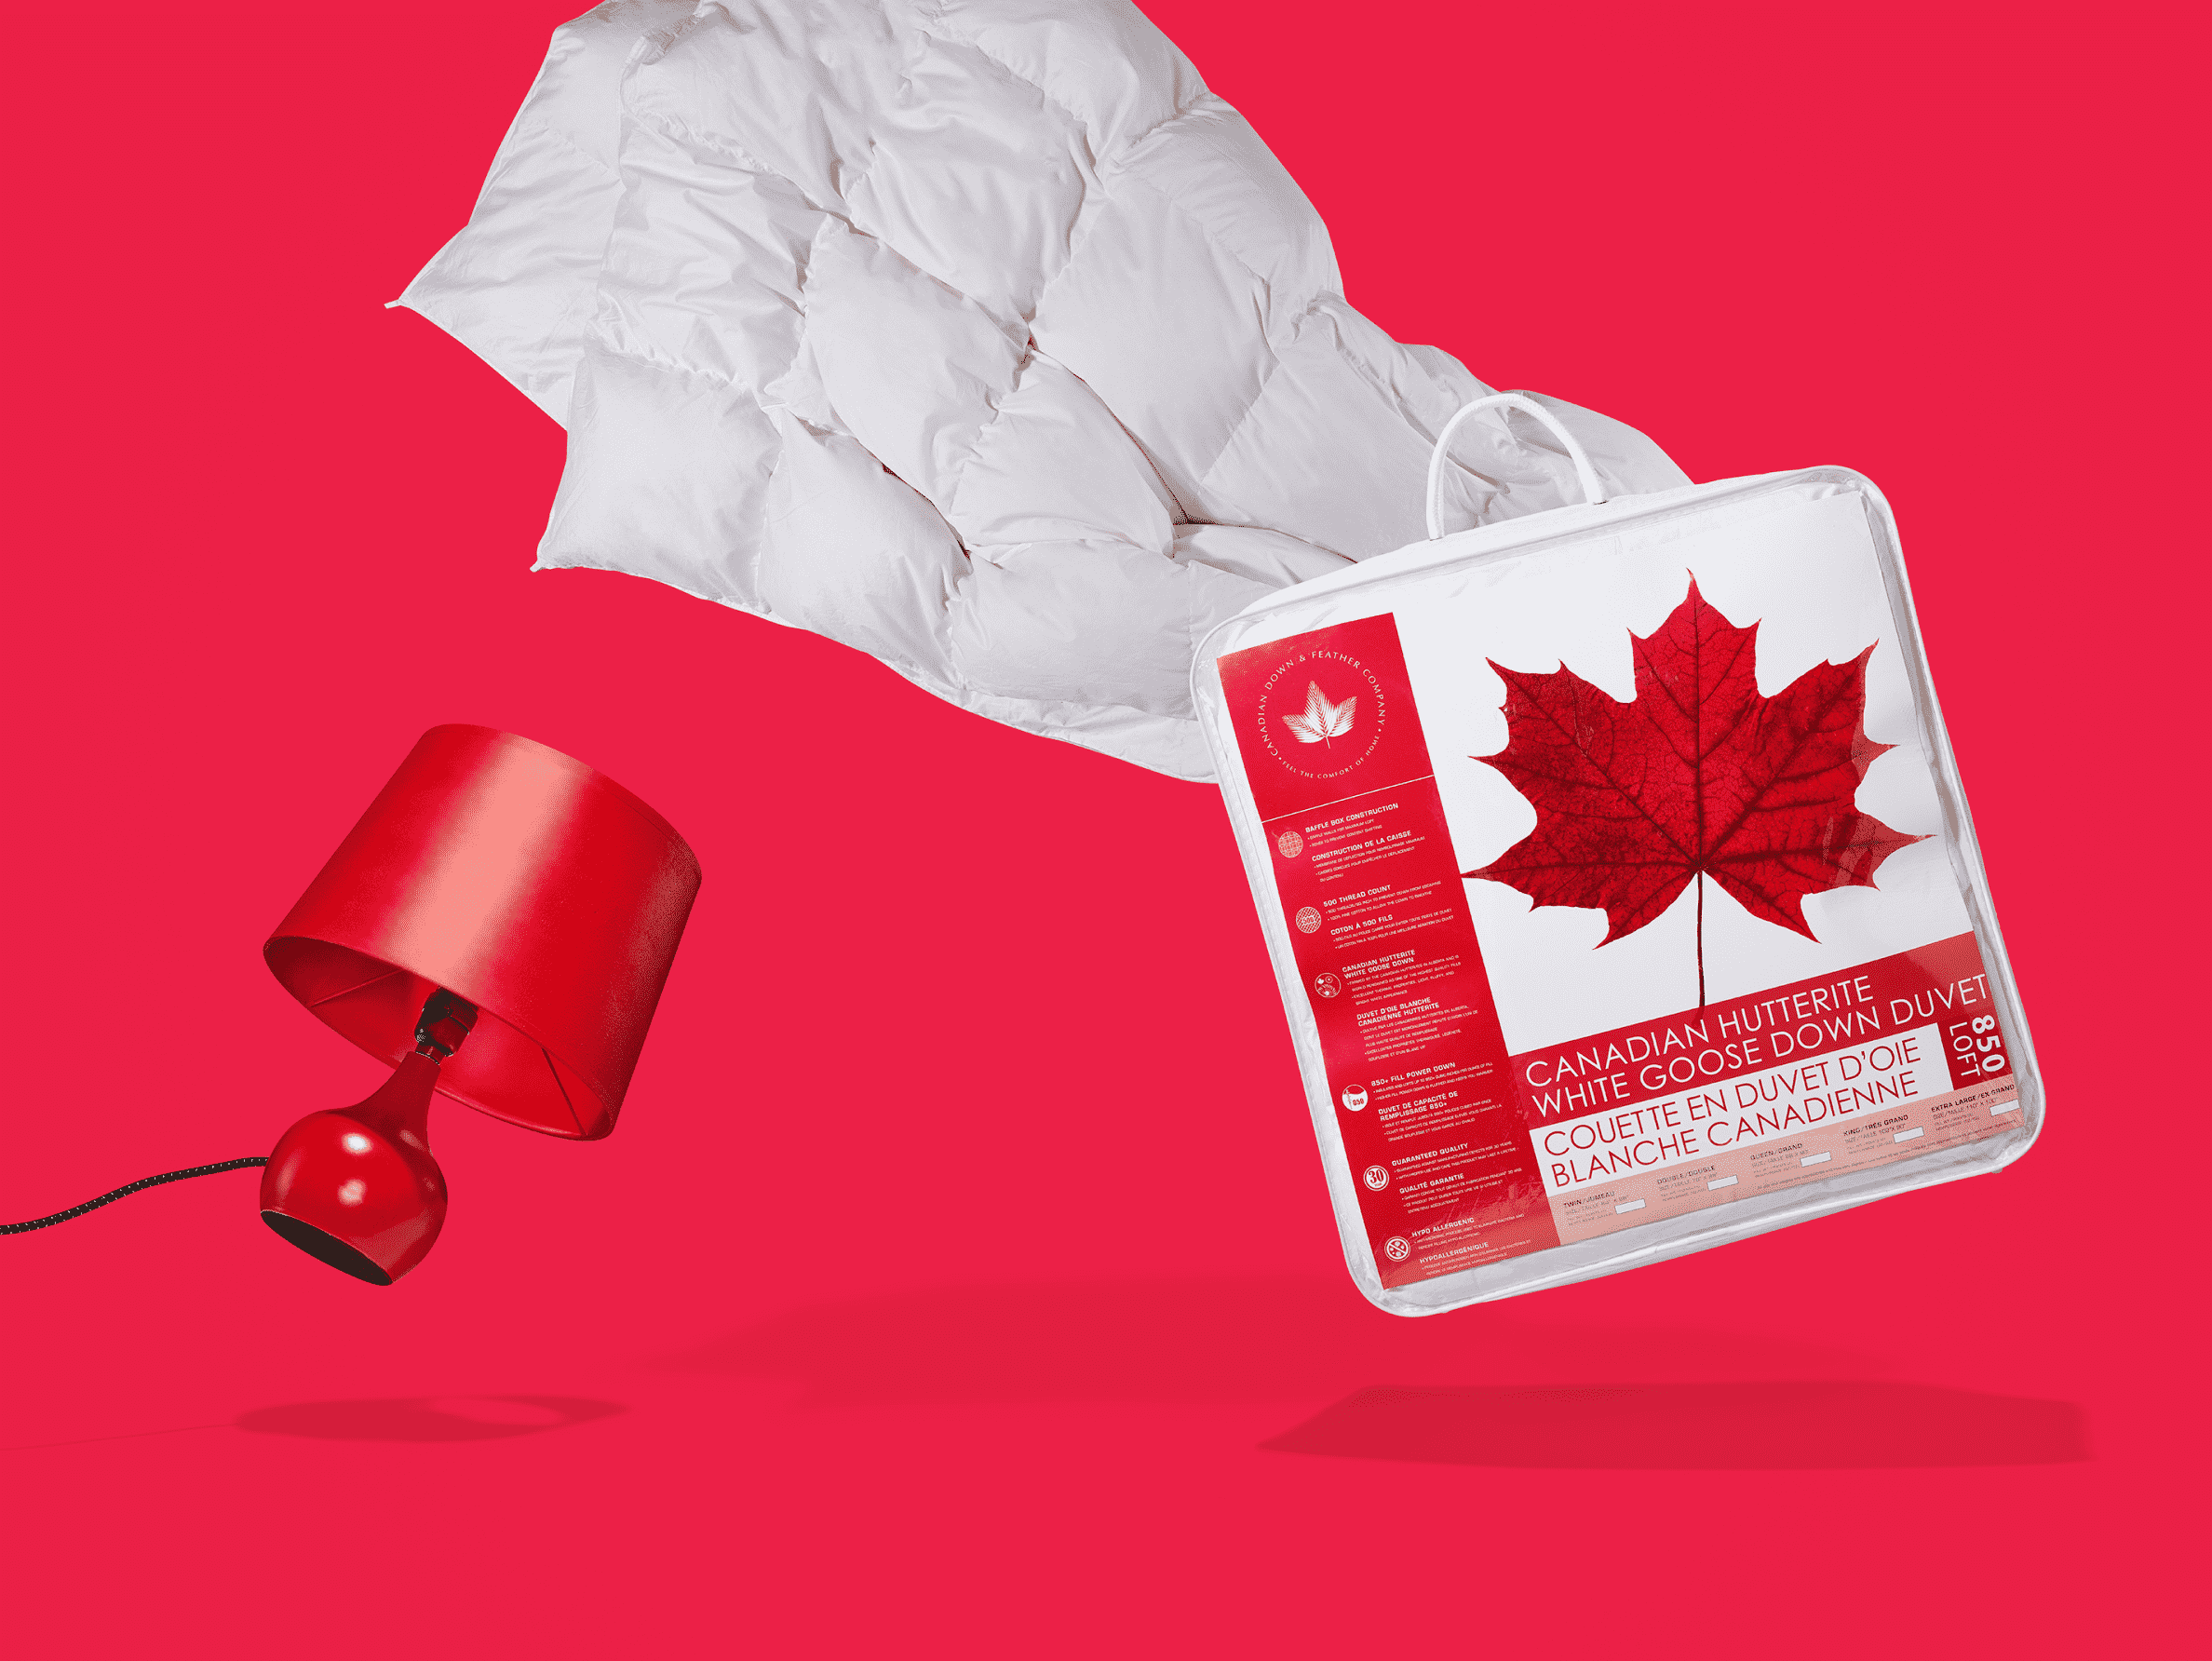 A Canadian Down and Feather white goose down duvet on a red background, next to a red lamp.